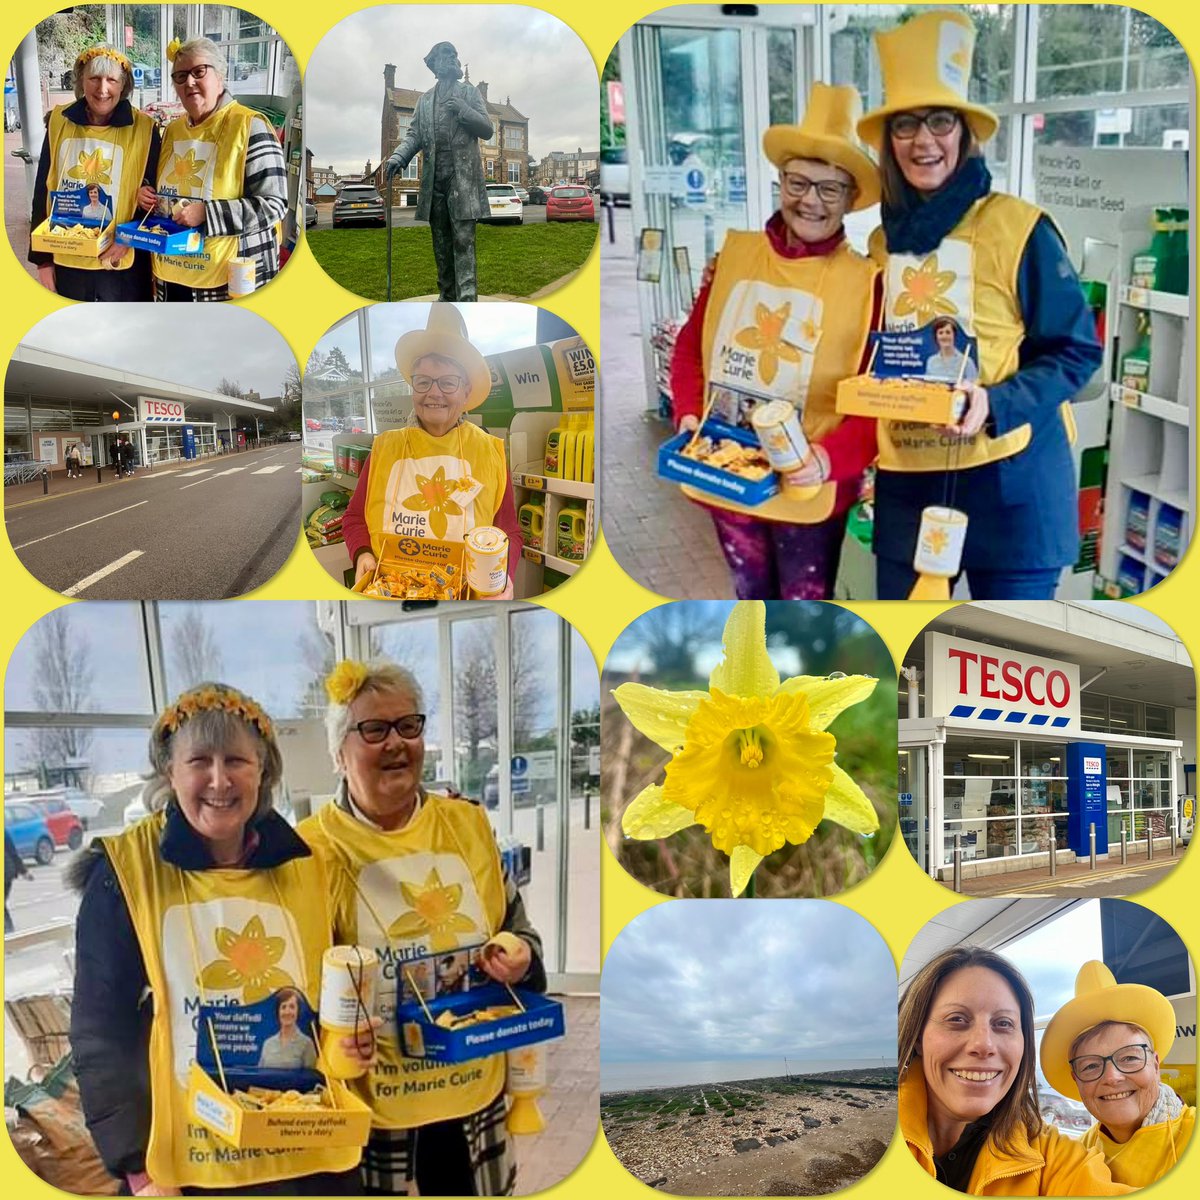 The end of two days of @mariecurieuk #GreatDaffodilAppeal collections in #SunnyHunny #Hunstanton #WestNorfolk at @Tesco in the town! Thanks to collectors Anne, Claire, David, Jennie, Polly & Jackie for covering it all! 🙏💛🙏 #norfolk 🙏💛🙏. Thanks to all donors & #Tesco too 🙏.